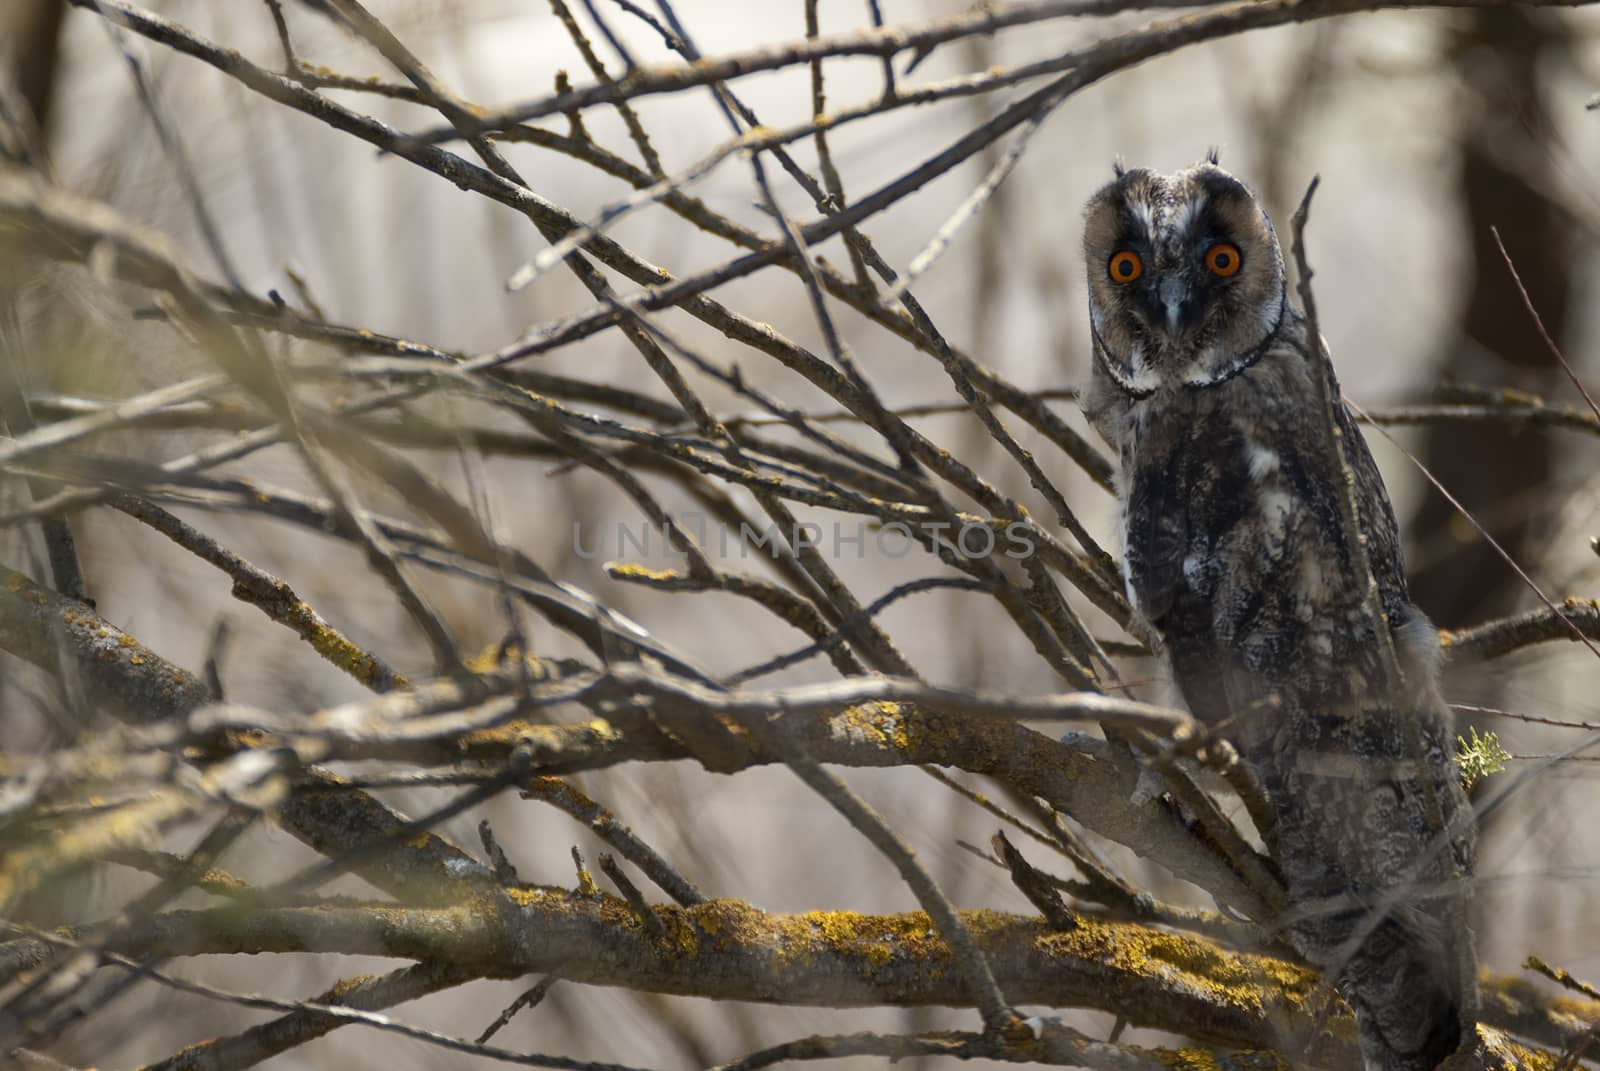 Long-eared owl, young (Asio otus), perched on the branches of a tree